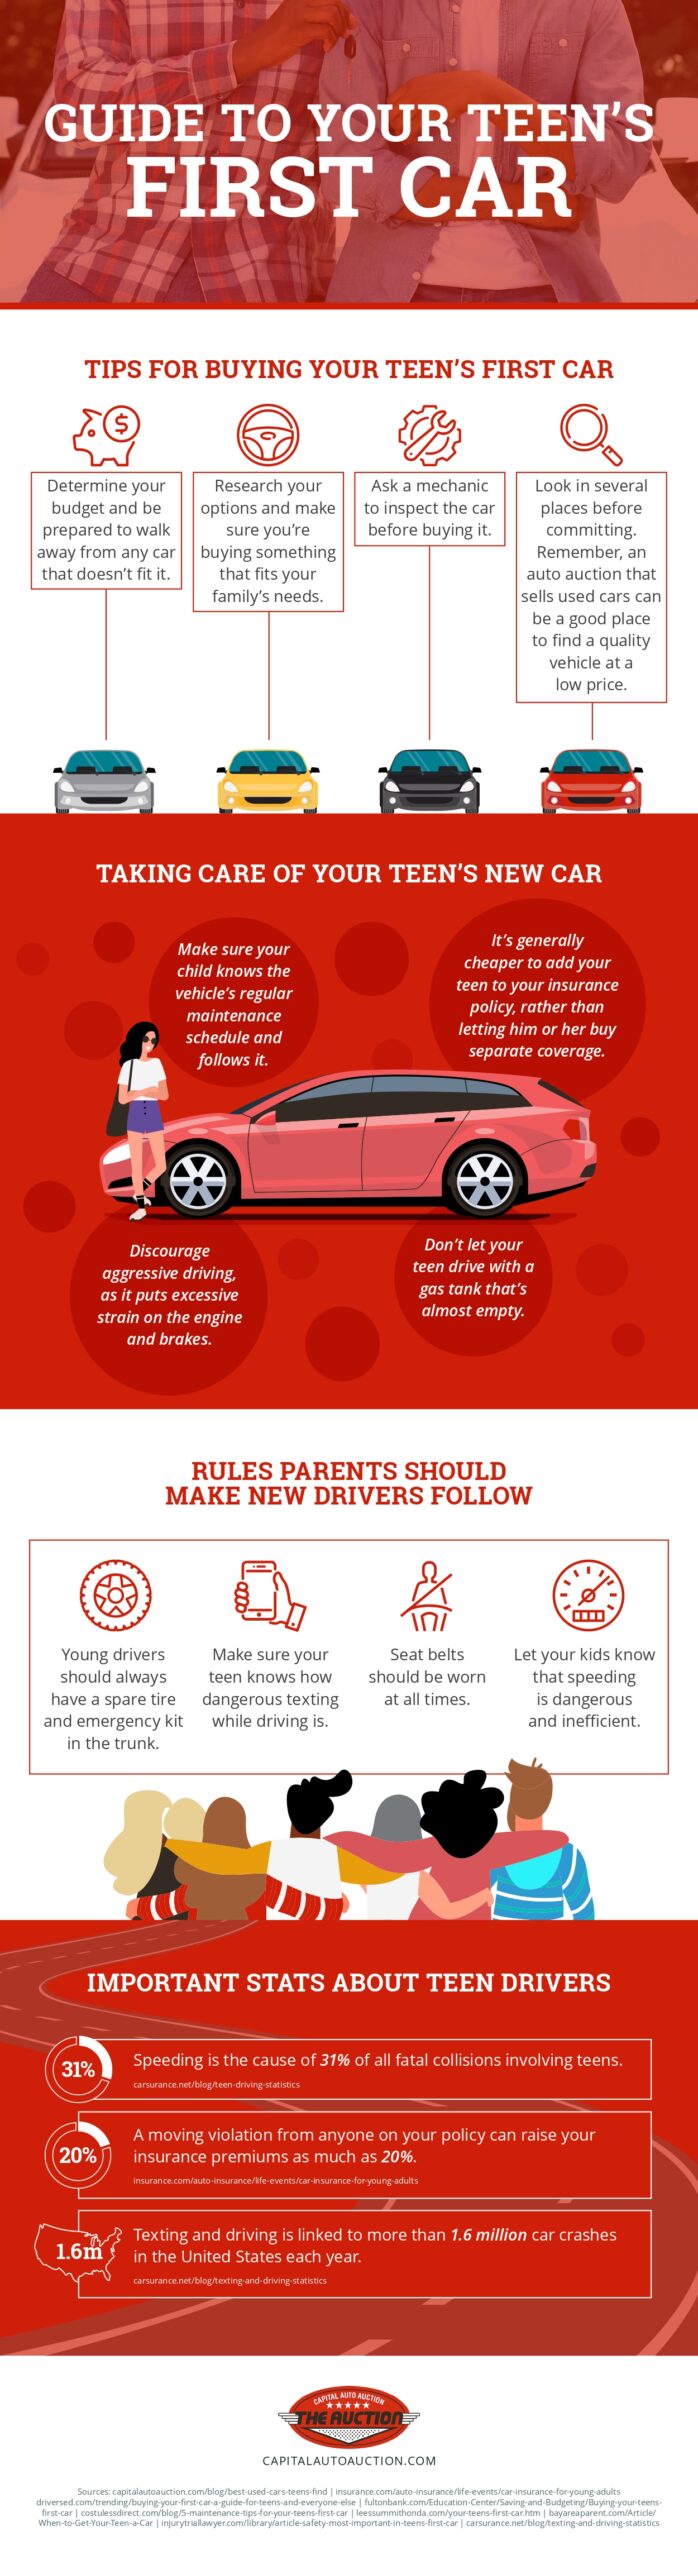 Guide To Your Teen's First Car